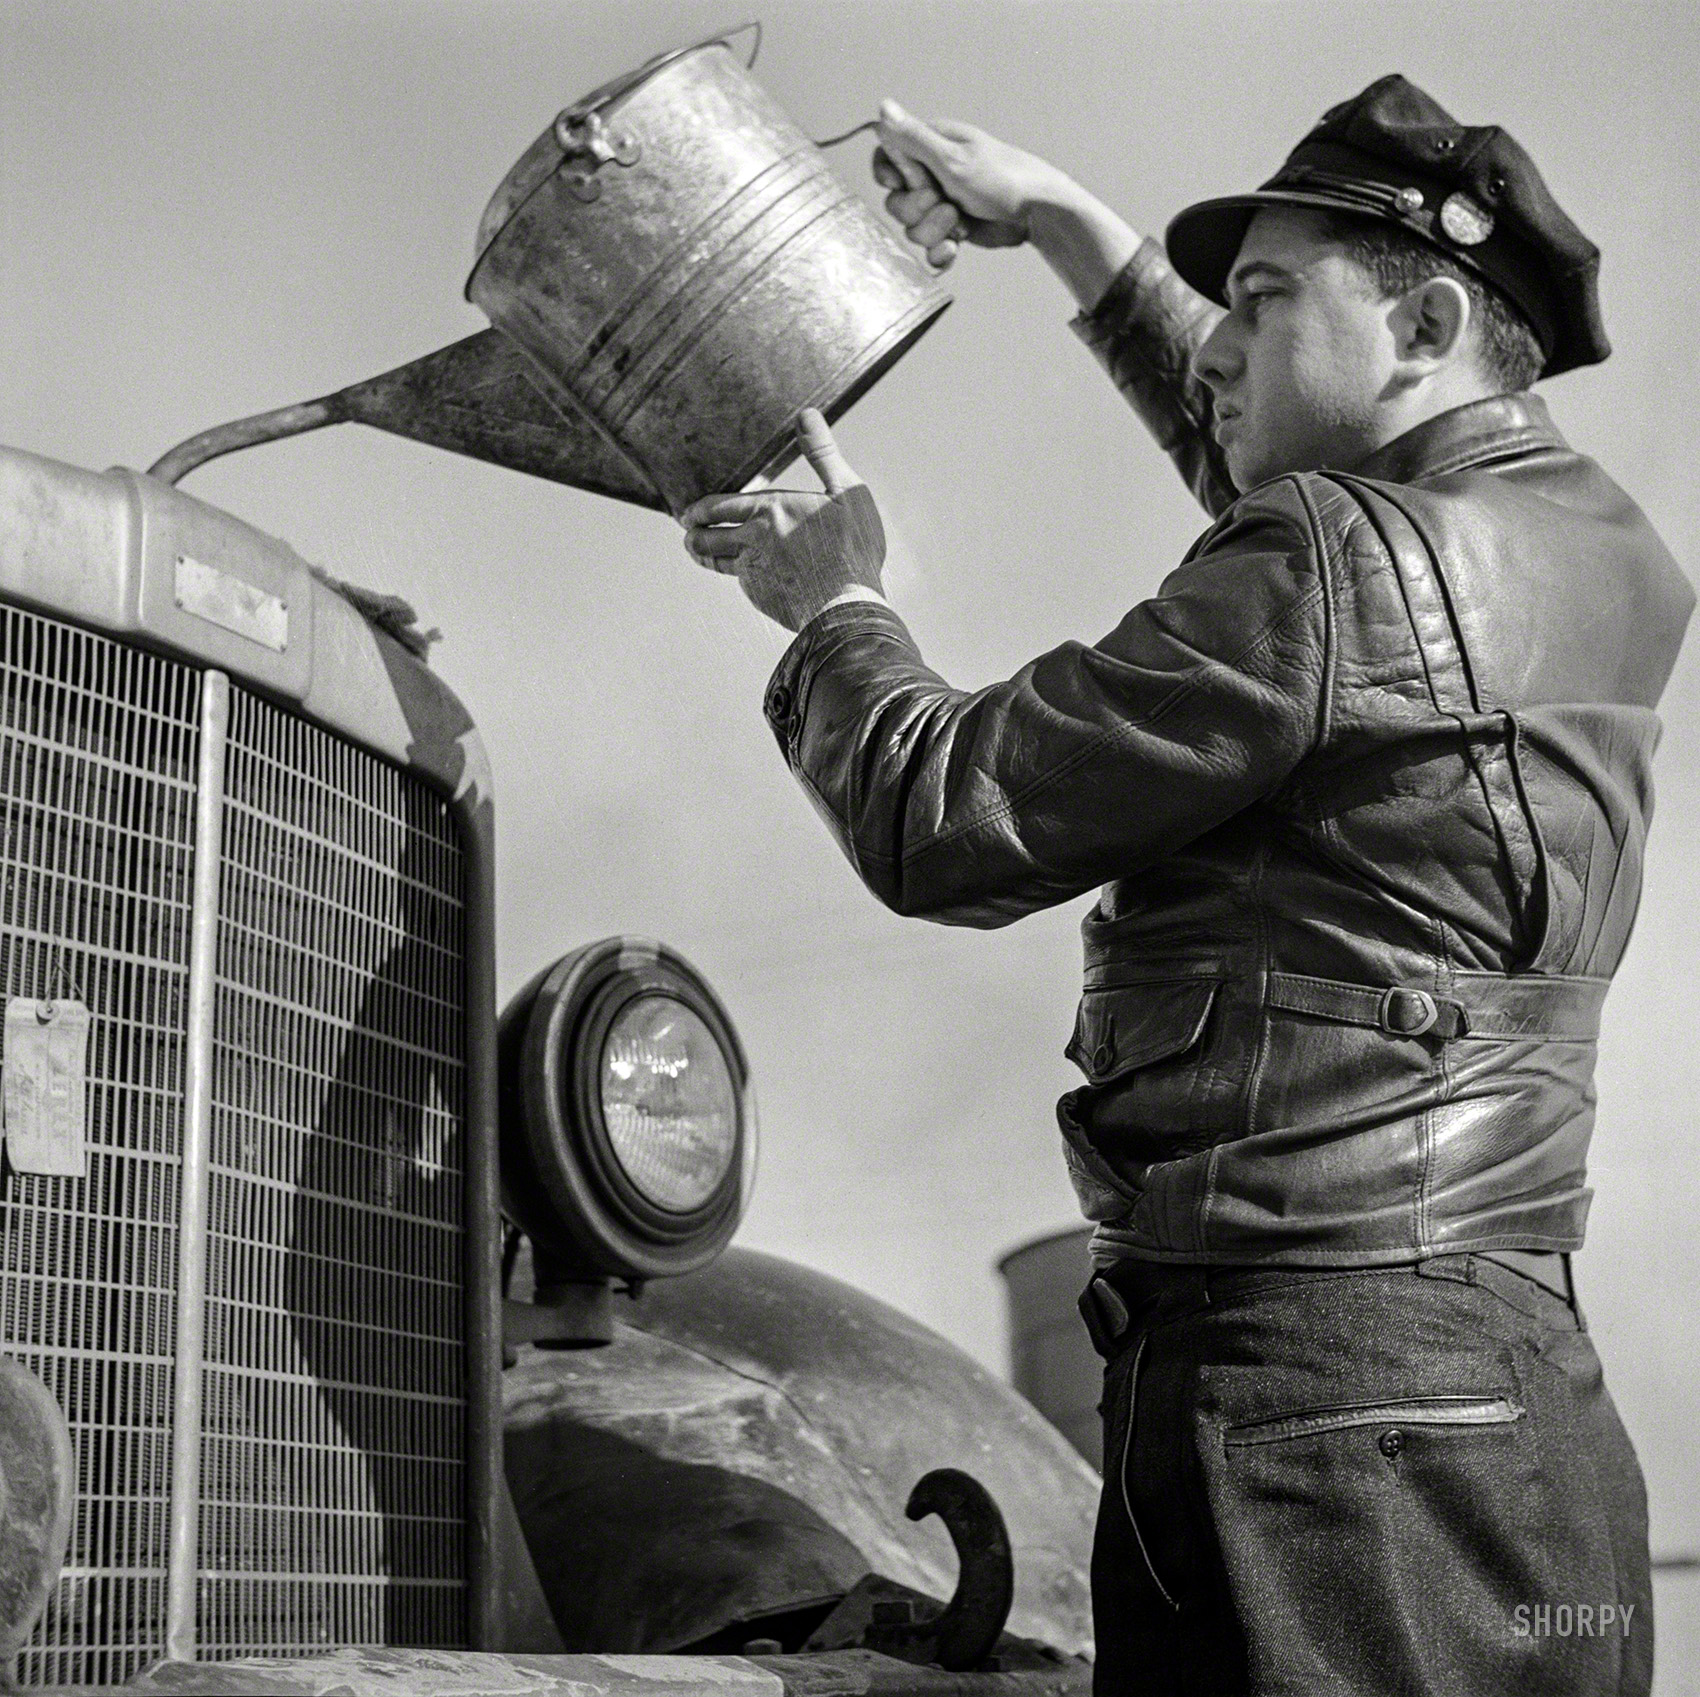 March 1943. "Melvin Cash, truck driver, putting water in his radiator along U.S. Highway 29 in North Carolina en route to Charlotte." Medium format negative by John Vachon for the Office of War Information. View full size.